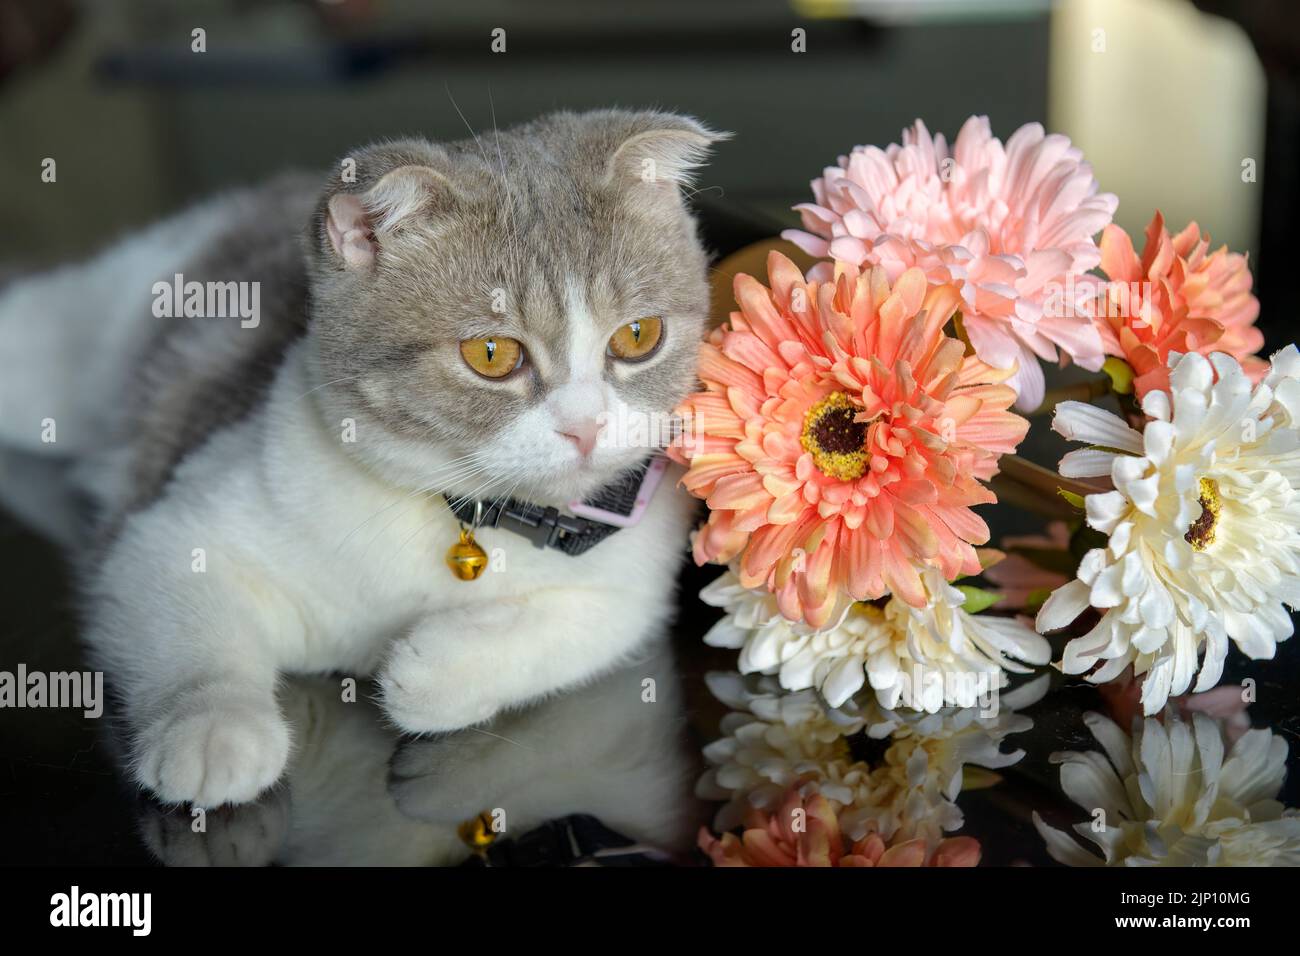 scottish fold cat white and gray stripes wearing a necklace and a bell Posing in a sitting position on a table with a pair of colorful flowers, straig Stock Photo